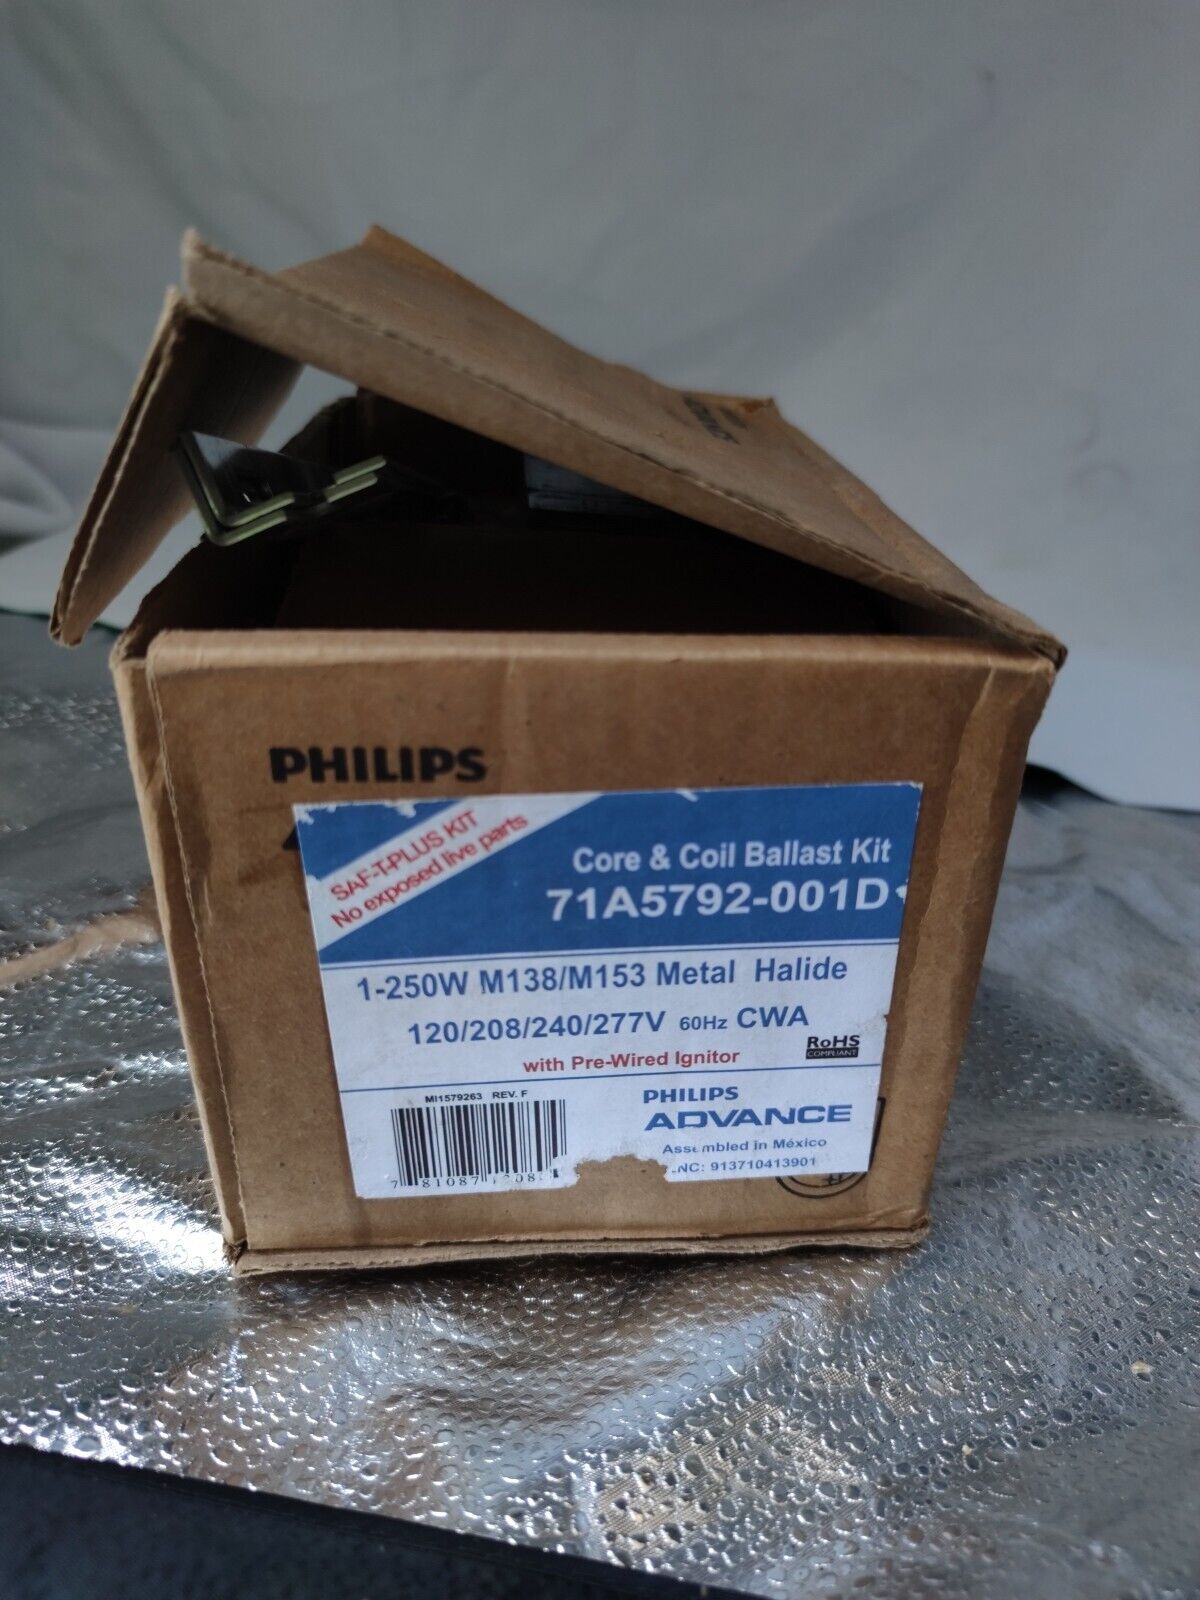 Philips Advance Core And Coil Ballast Kit 1-250W - 71A5892-001D.Free Shipping.